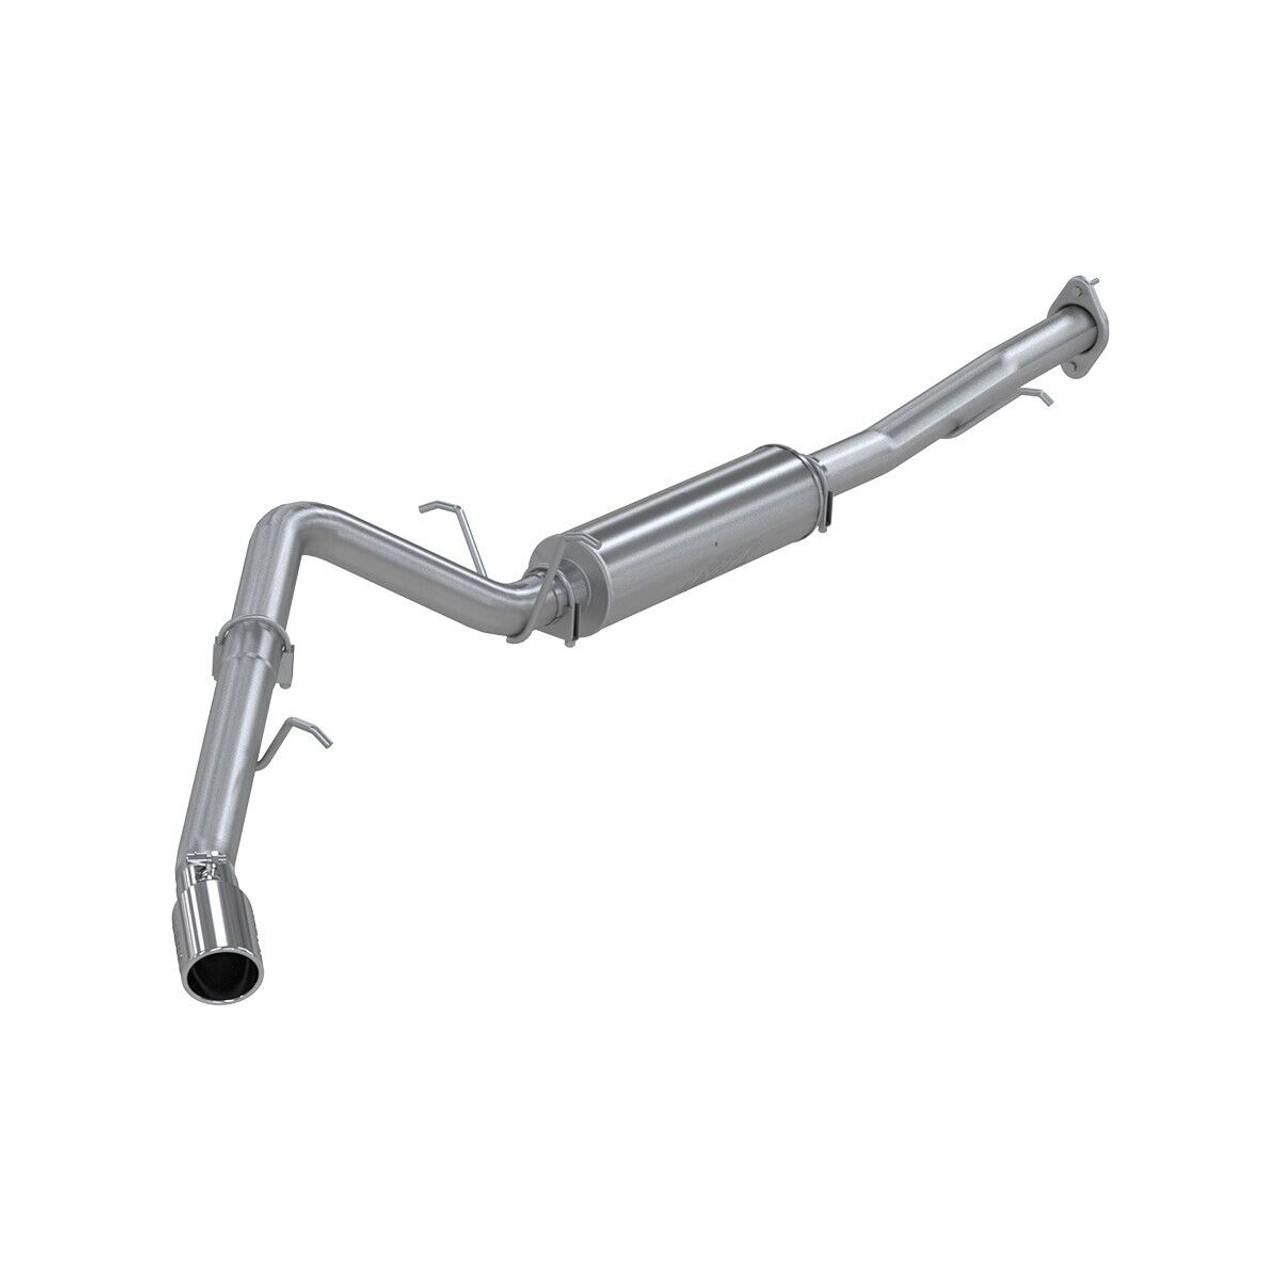 MBRP STAINLESS STEEL EXHAUST FOR 2007-2008 CHEVY TAHOE GMC YUKON 5.3L S5044409